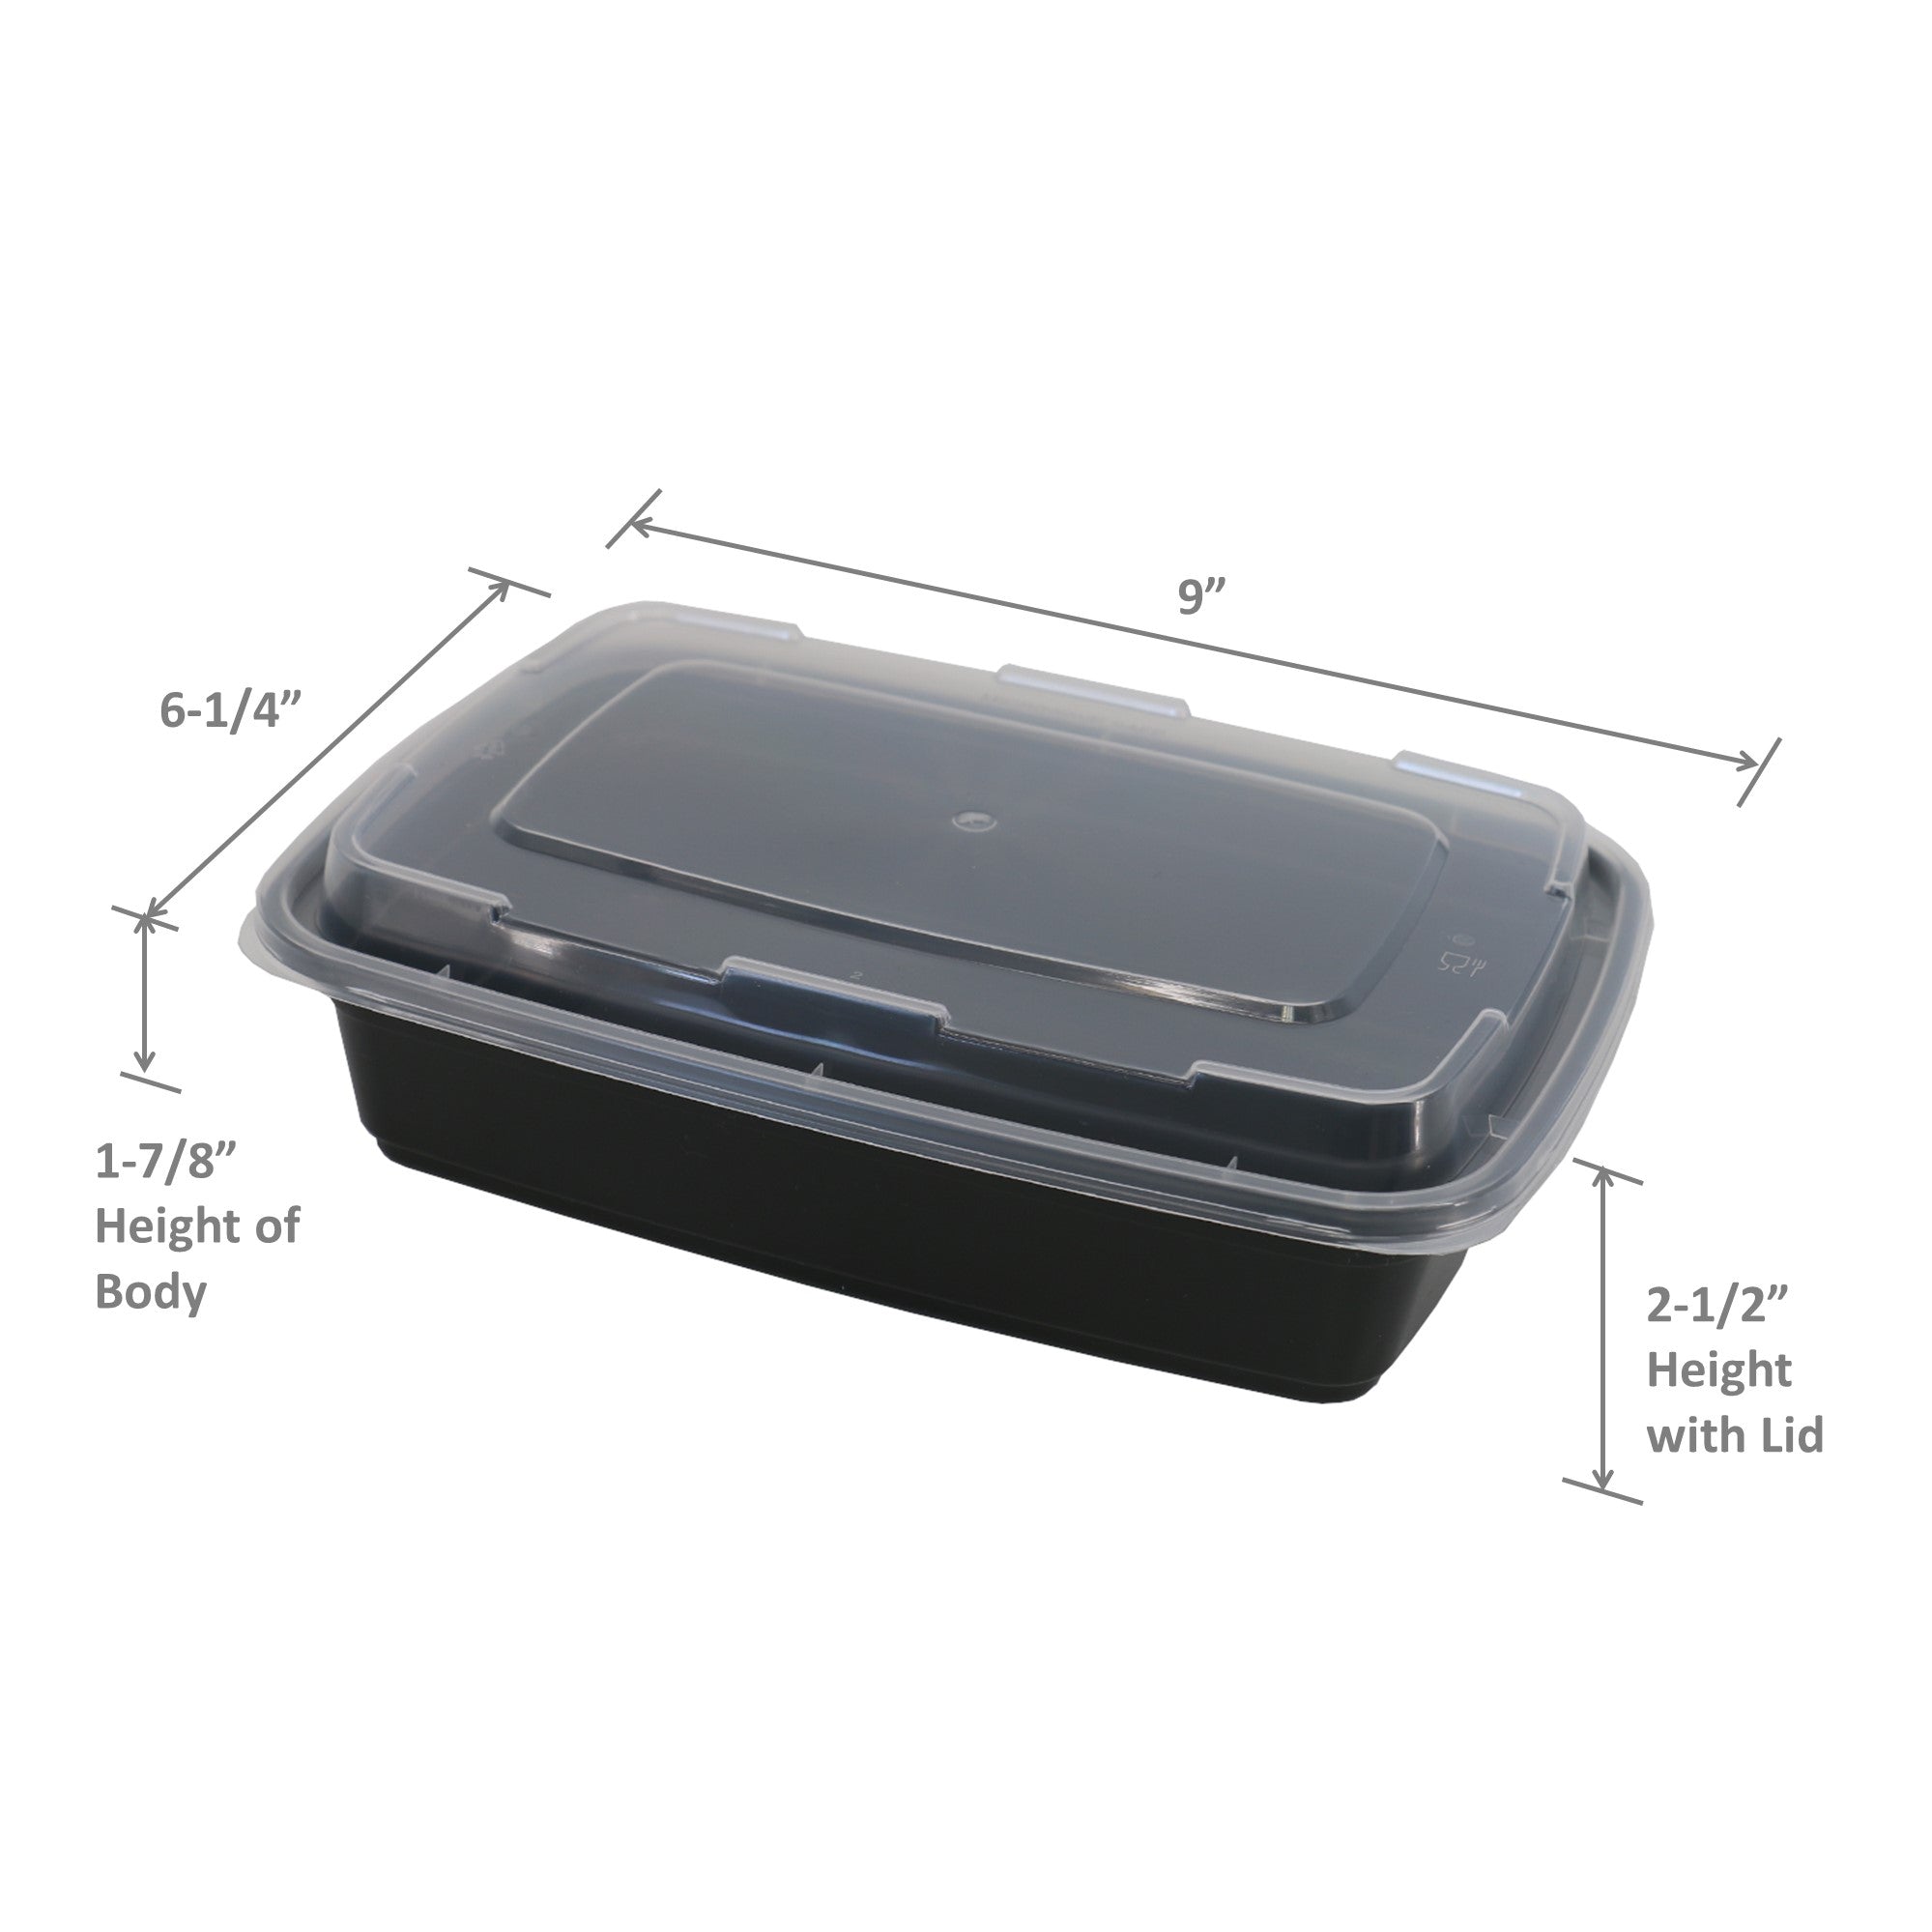 Leyso TO-JH24 24oz One Compartment Bento Box Food Container with Clear